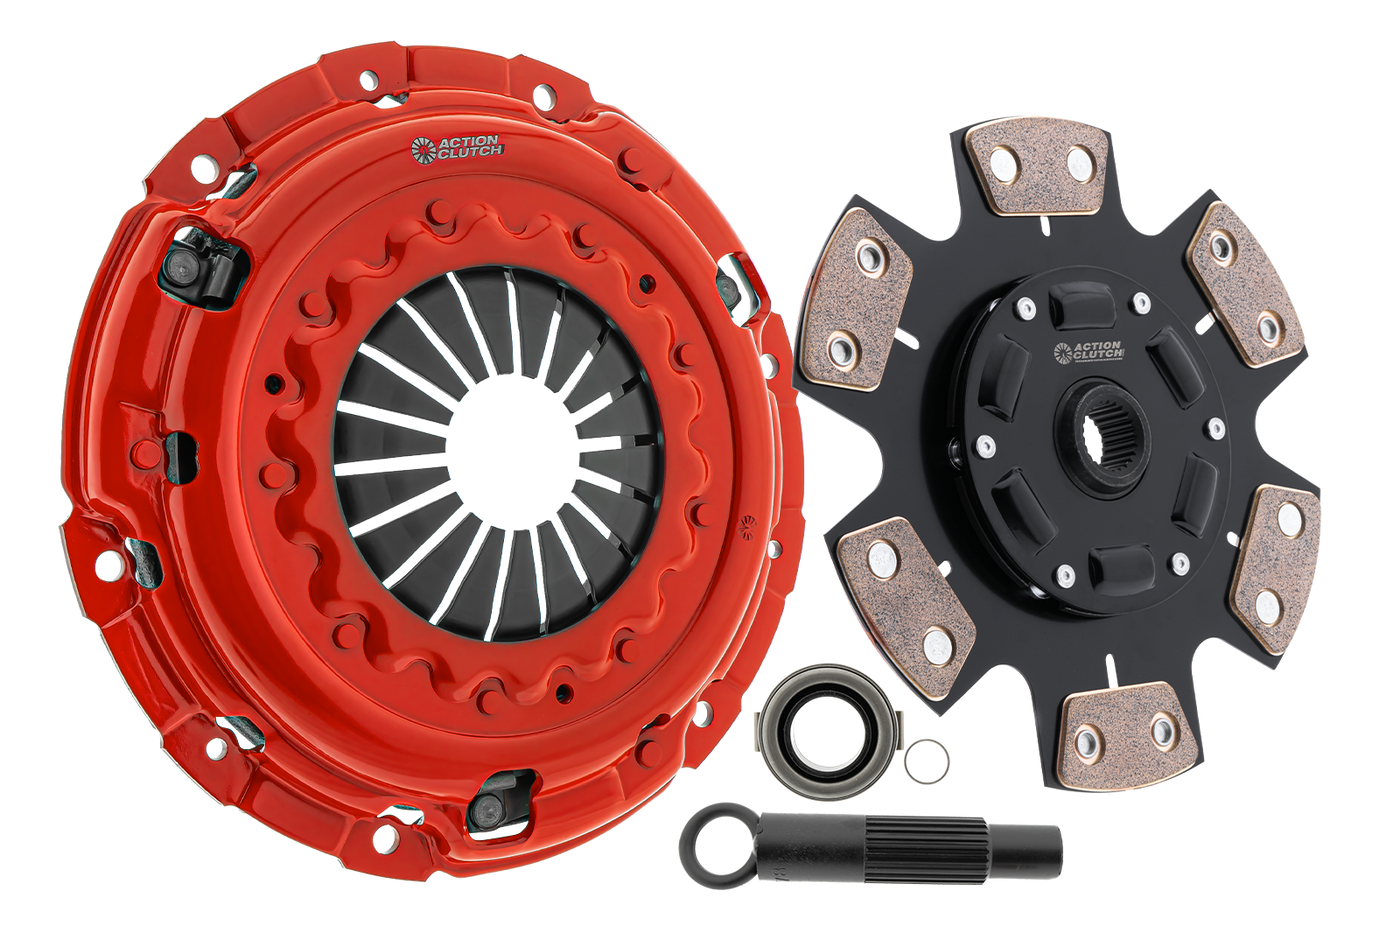 Stage 3 Clutch Kit (1MS) for Volkswagen Golf 2000-2006 1.8L Turbo 5 Speed Only Includes Lightened Flywheel